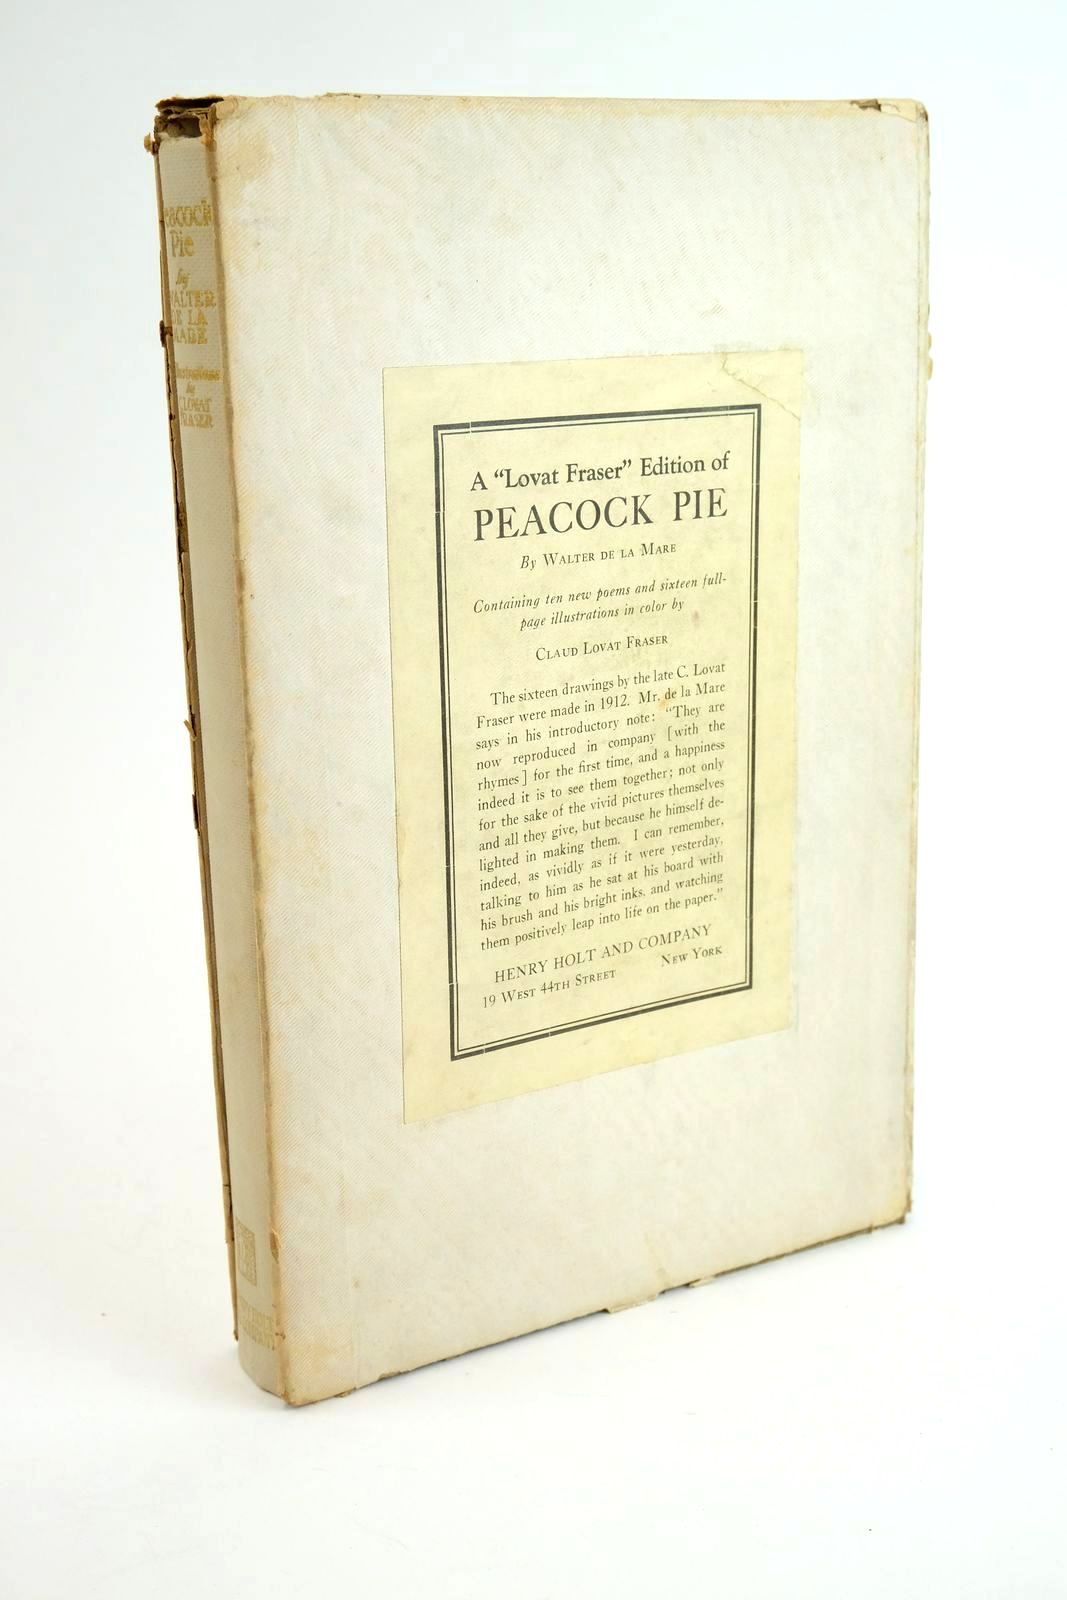 Photo of PEACOCK PIE - A BOOK OF RHYMES written by De La Mare, Walter illustrated by Fraser, Claud Lovat published by Henry Holt and Company (STOCK CODE: 1323474)  for sale by Stella & Rose's Books